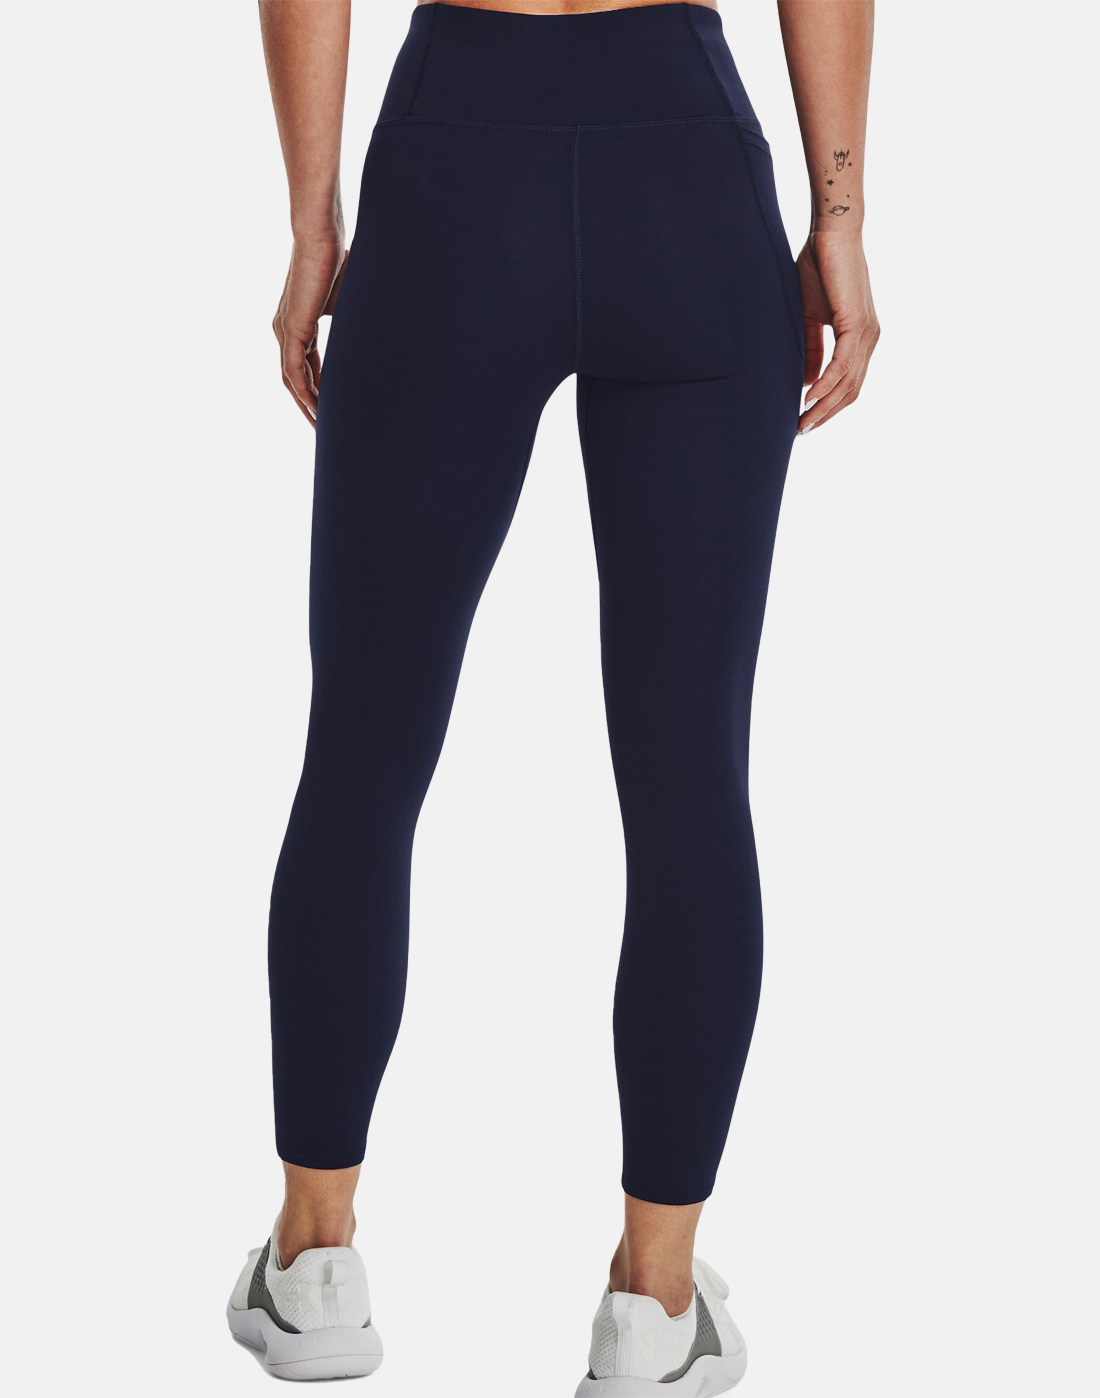 Under Armour Womens Motion Ankle Leggings - Navy | Life Style Sports IE